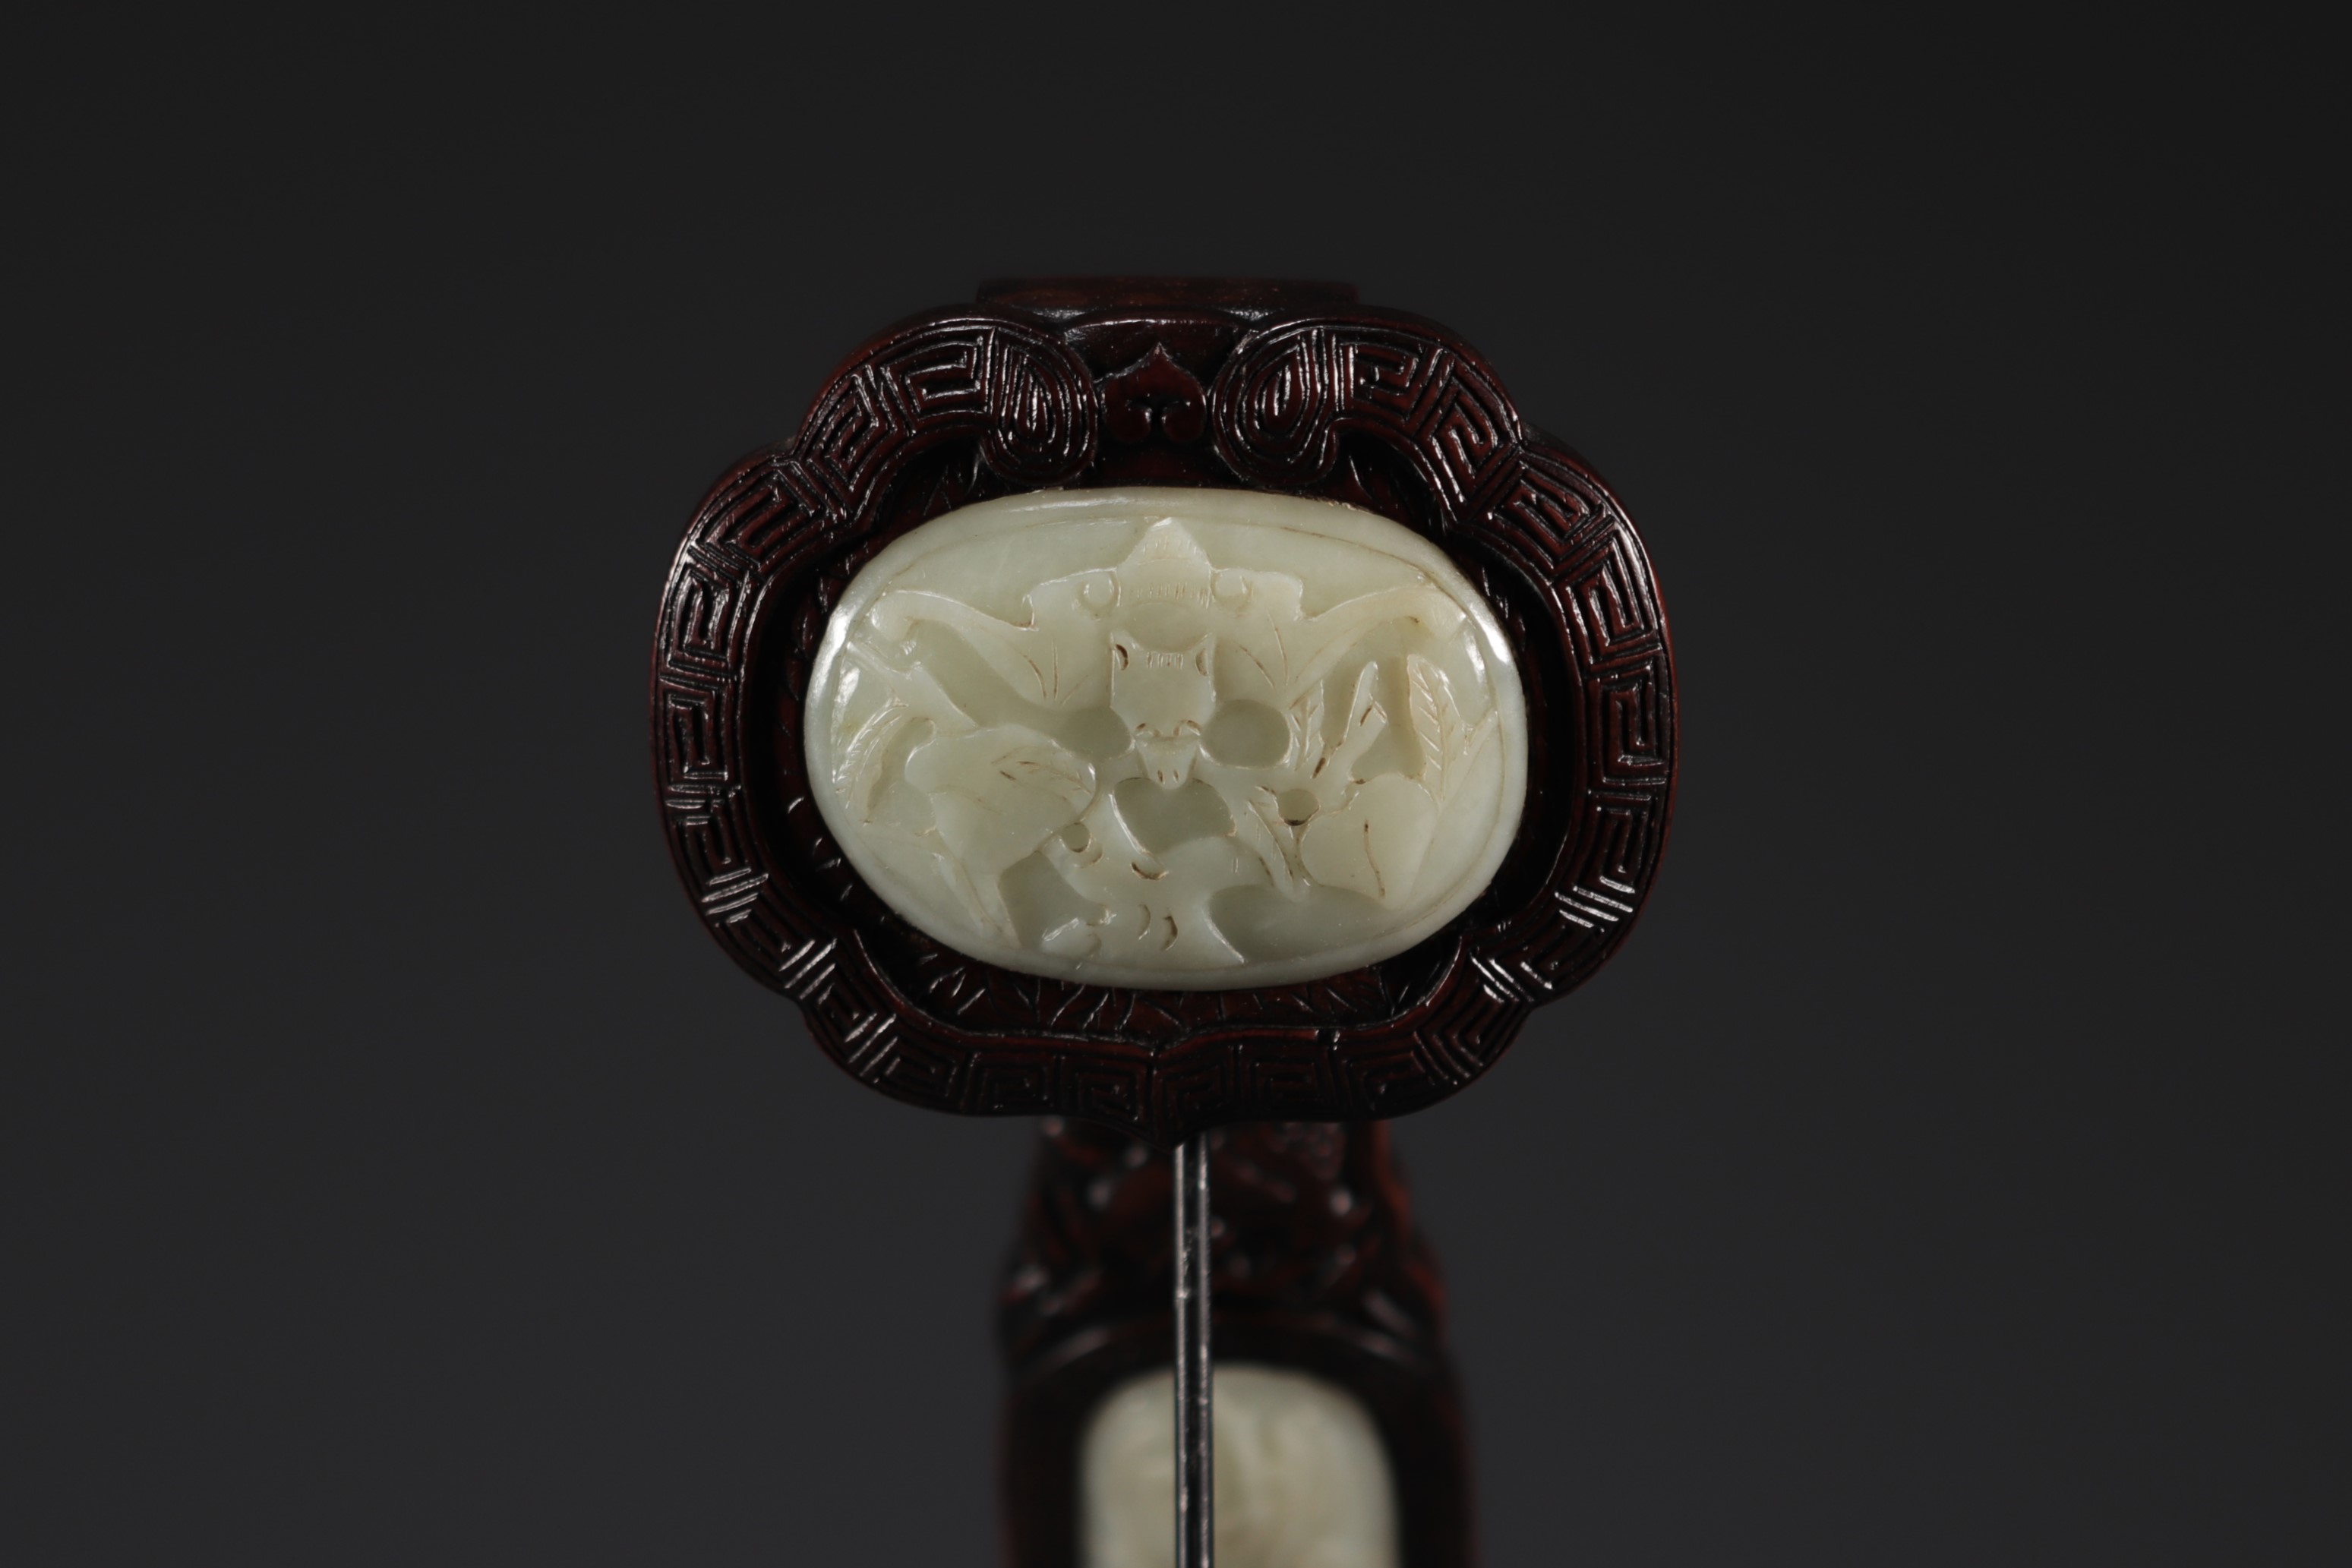 China - Large Ruyi scepter in carved Zitan wood and celadon jade, decorated with bats and peaches. - Image 3 of 5